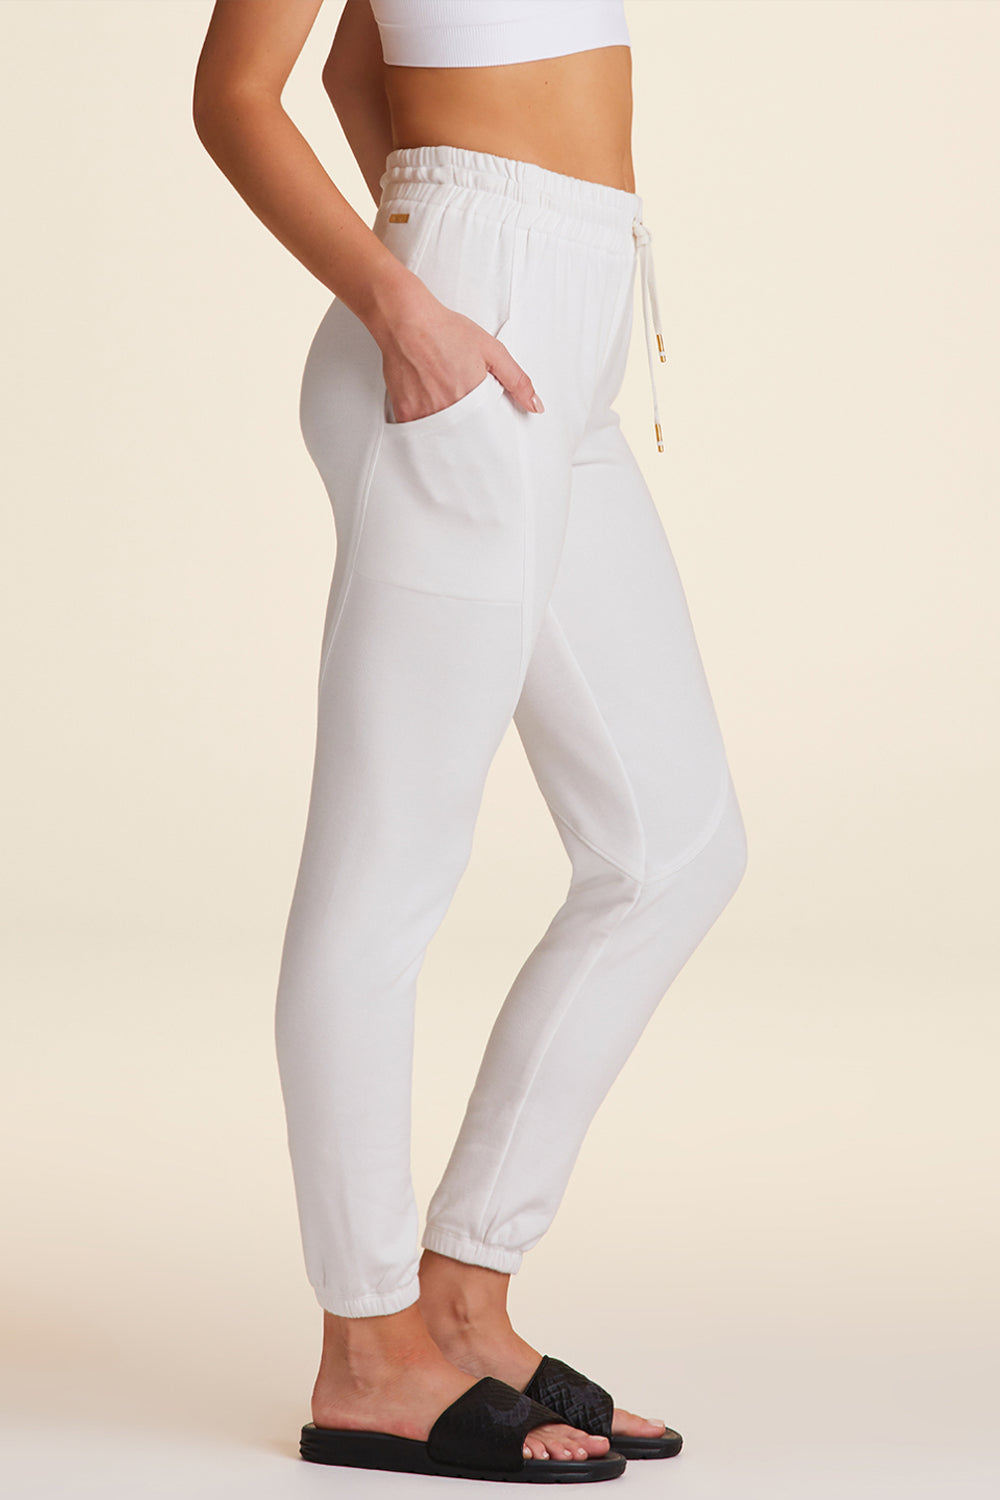 Loungewear Pants For the Off-Duty Athlete